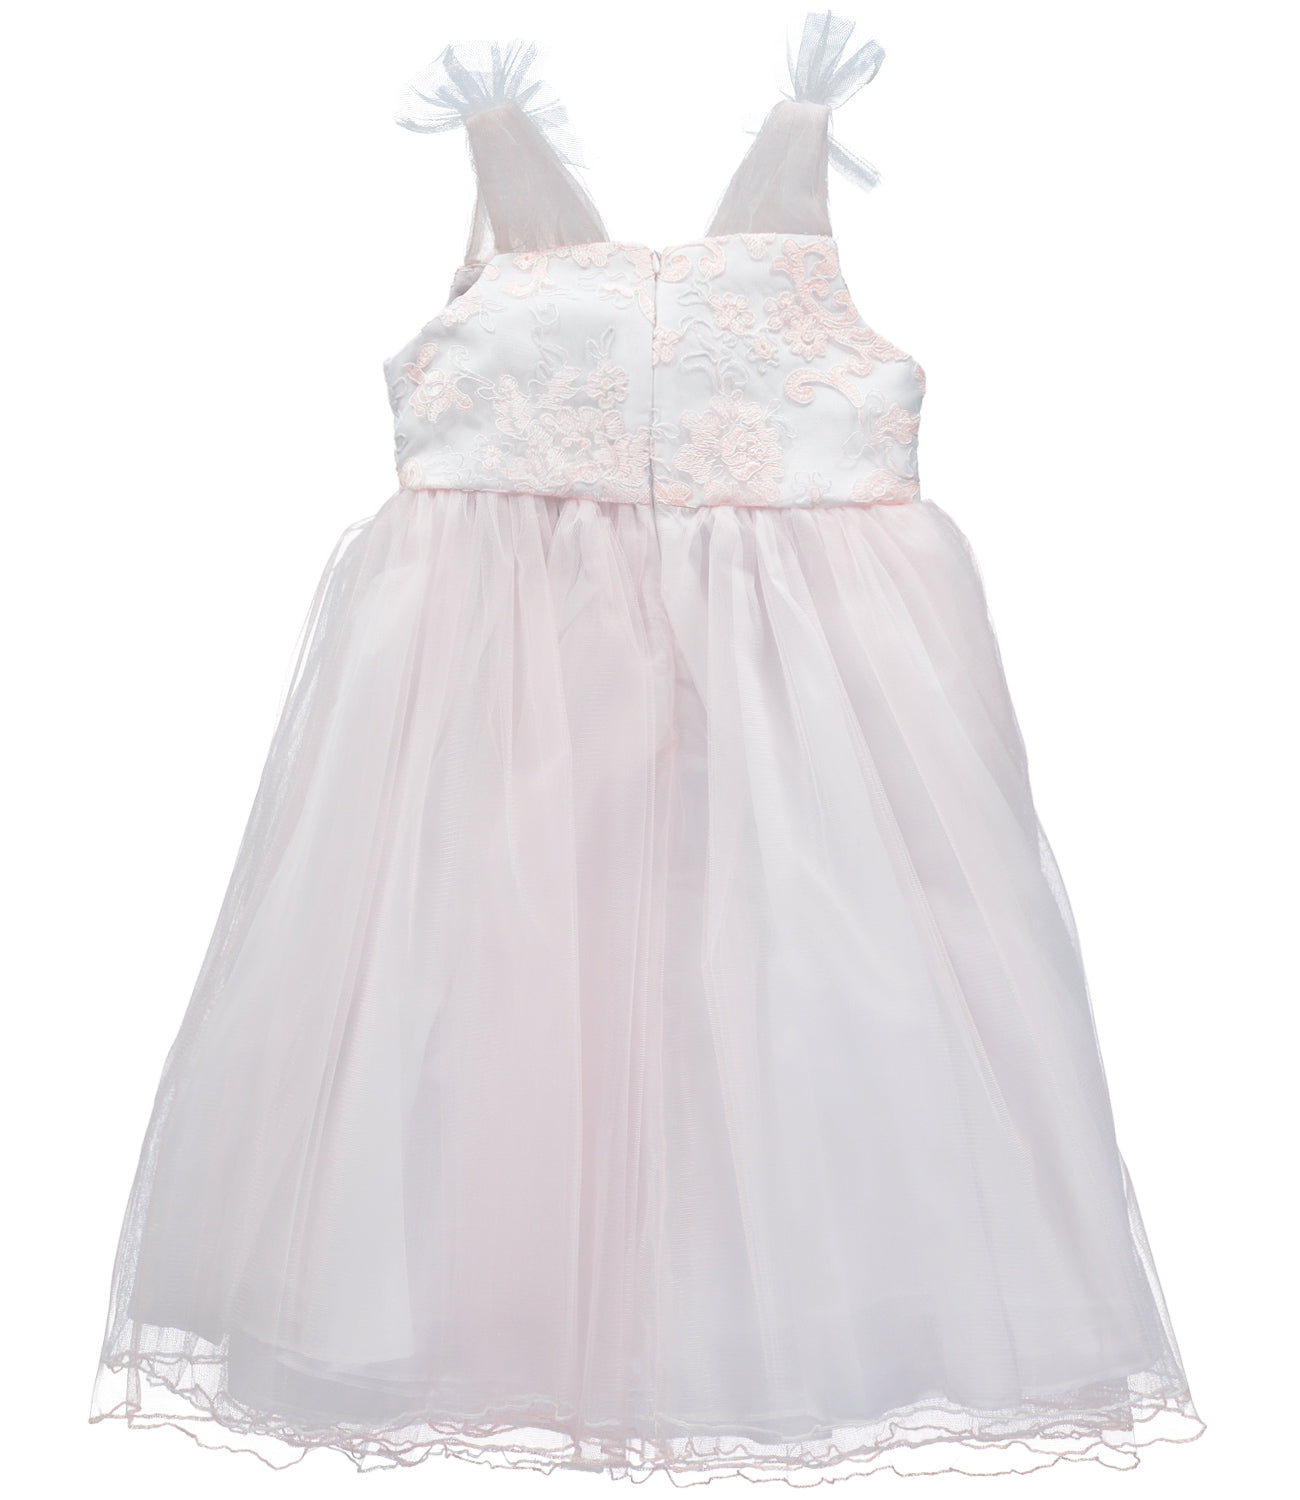 Bonnie Jean Girls 7-16 Embroidered Pearl Accented Tulle Dress